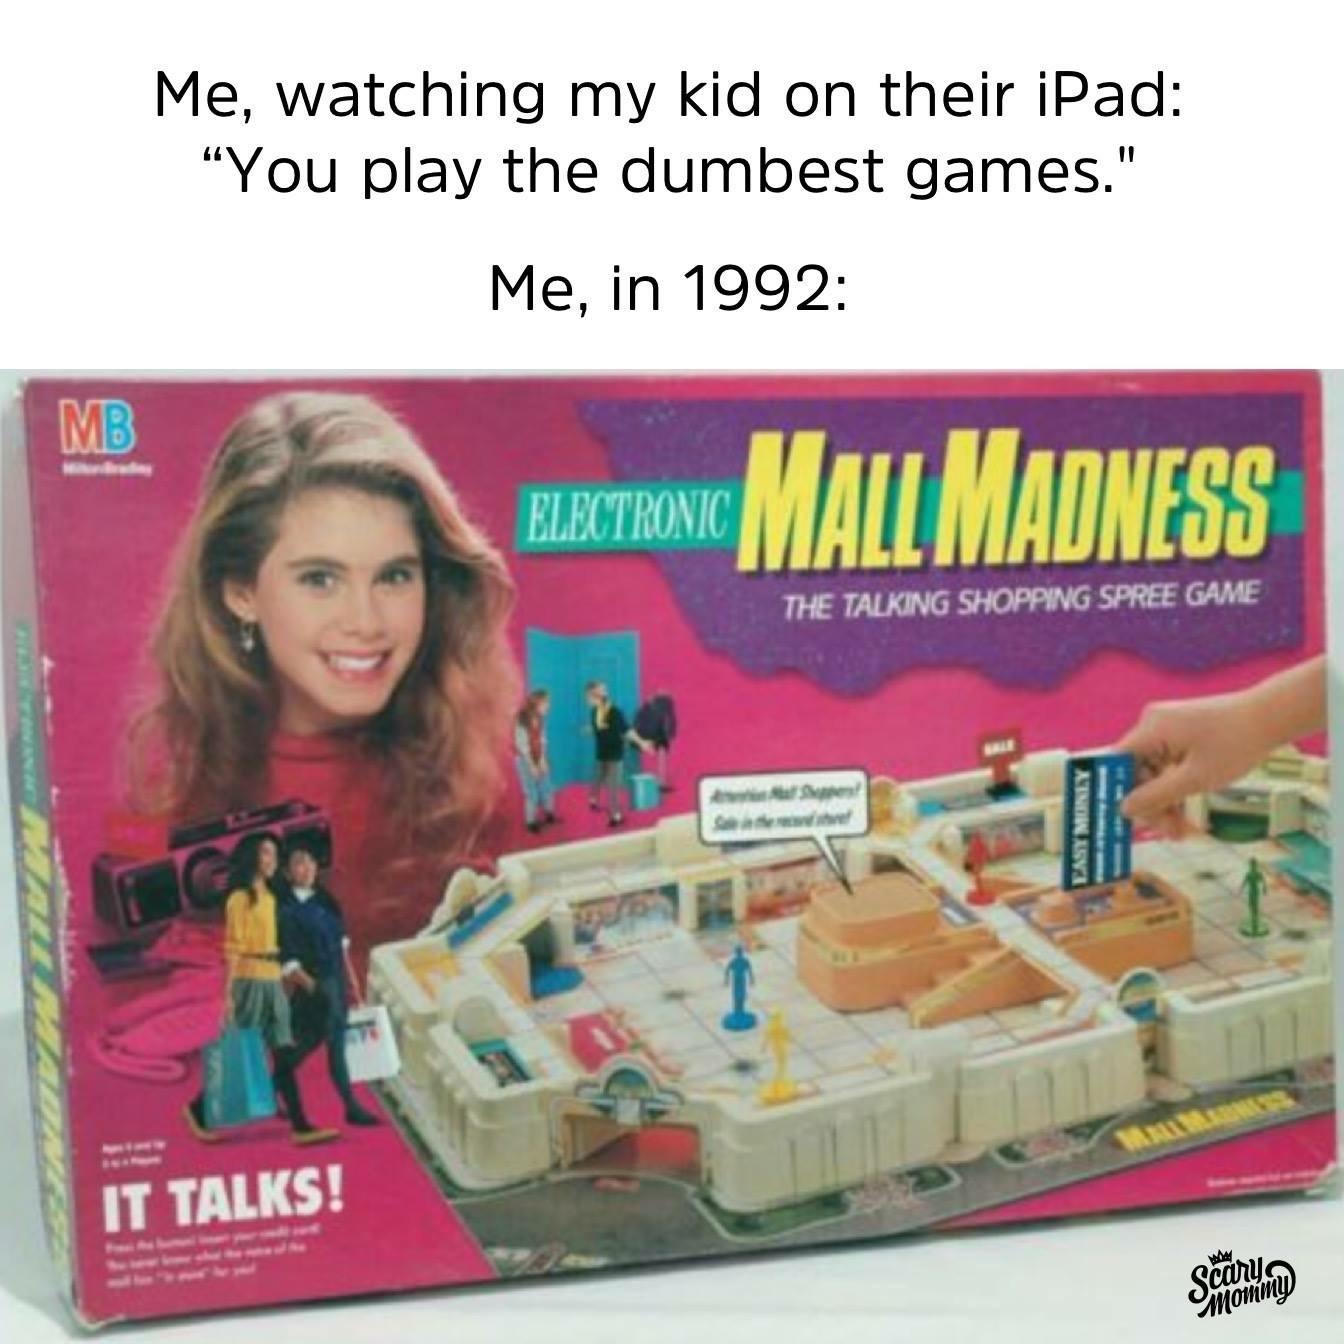 funny memes and pics - mall madness board game 1989 - Me, watching my kid on their iPad "You play the dumbest games." Me, in 1992 Mb Electronic Mall Madness The Talking Shopping Spree Game Easy Money Sa It Talks!